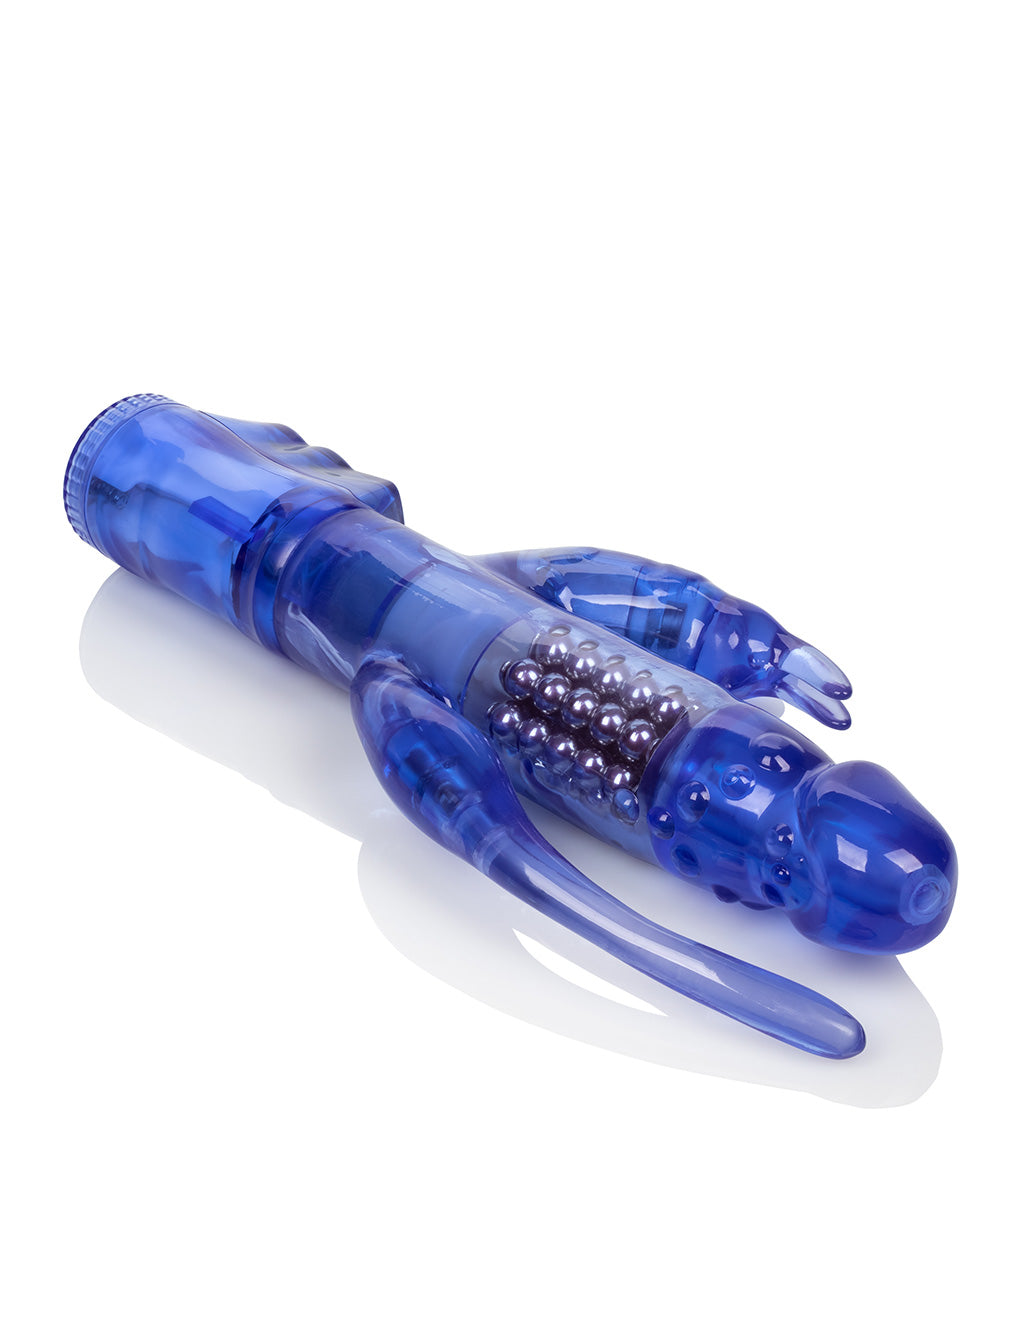 Cal Exotics Delight Triple Orgasm Toy Angled